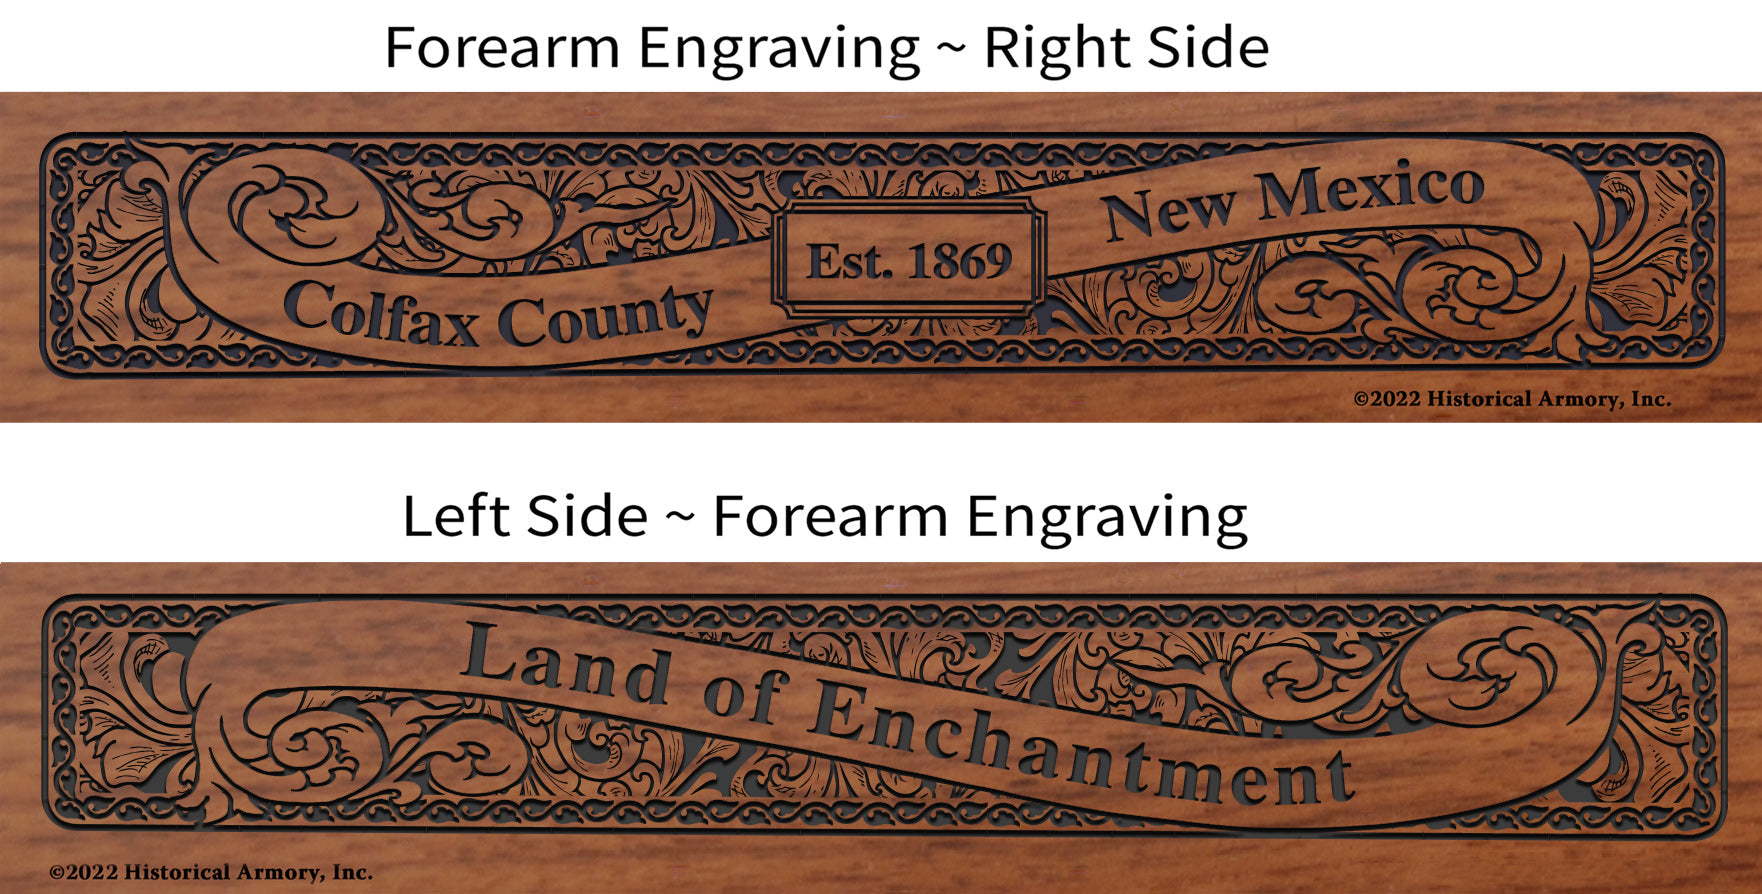 Colfax County New Mexico Engraved Rifle Forearm